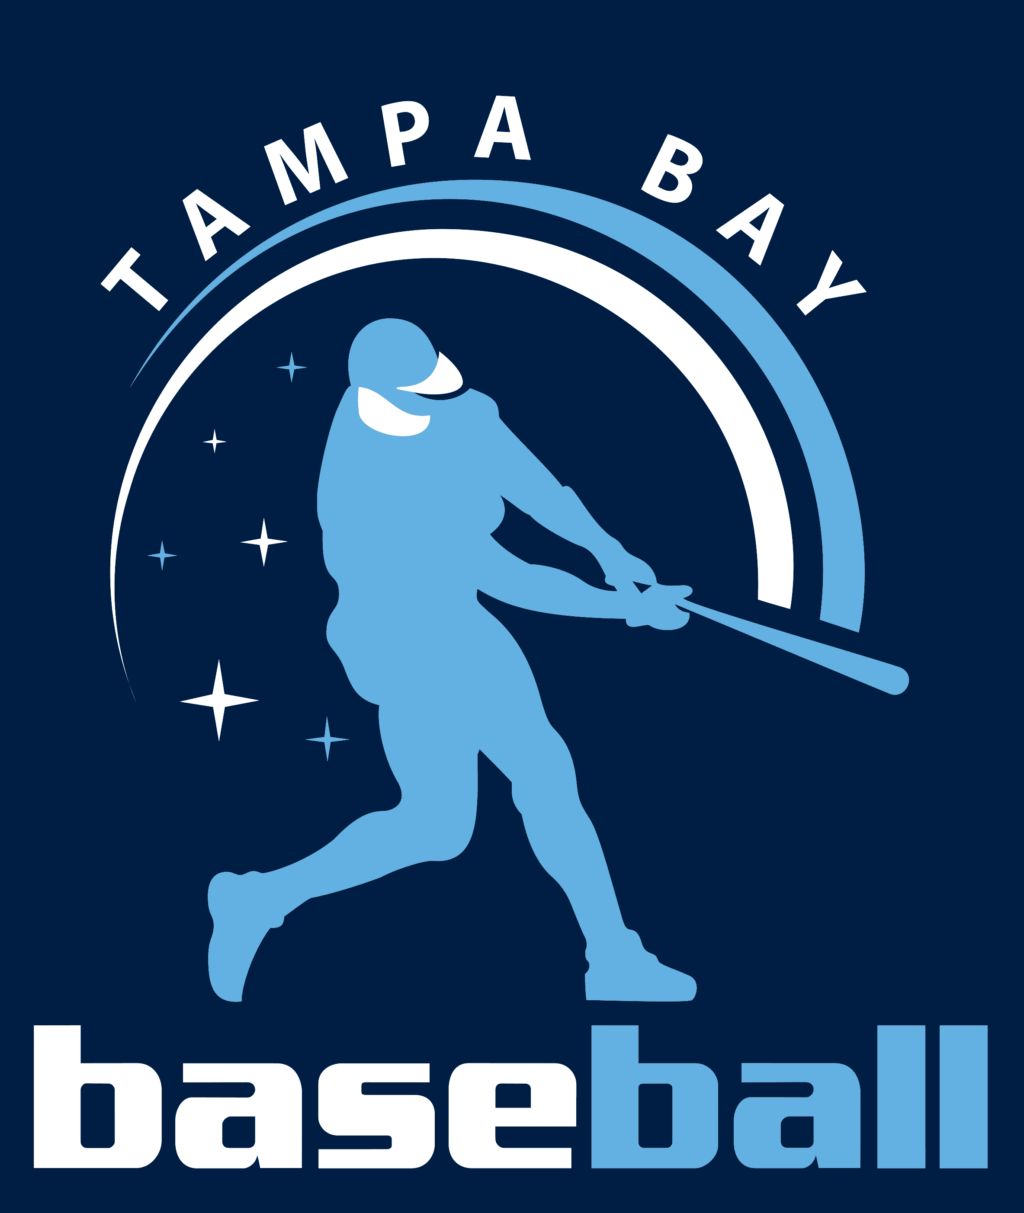 tampa bay rays 19 MLB Logo Tampa Bay Rays, Tampa Bay Rays SVG, Vector Tampa Bay Rays Clipart Tampa Bay Rays, Baseball Kit Tampa Bay Rays, SVG, DXF, PNG, Baseball Logo Vector Tampa Bay Rays EPS download MLB-files for silhouette, Tampa Bay Rays files for clipping.